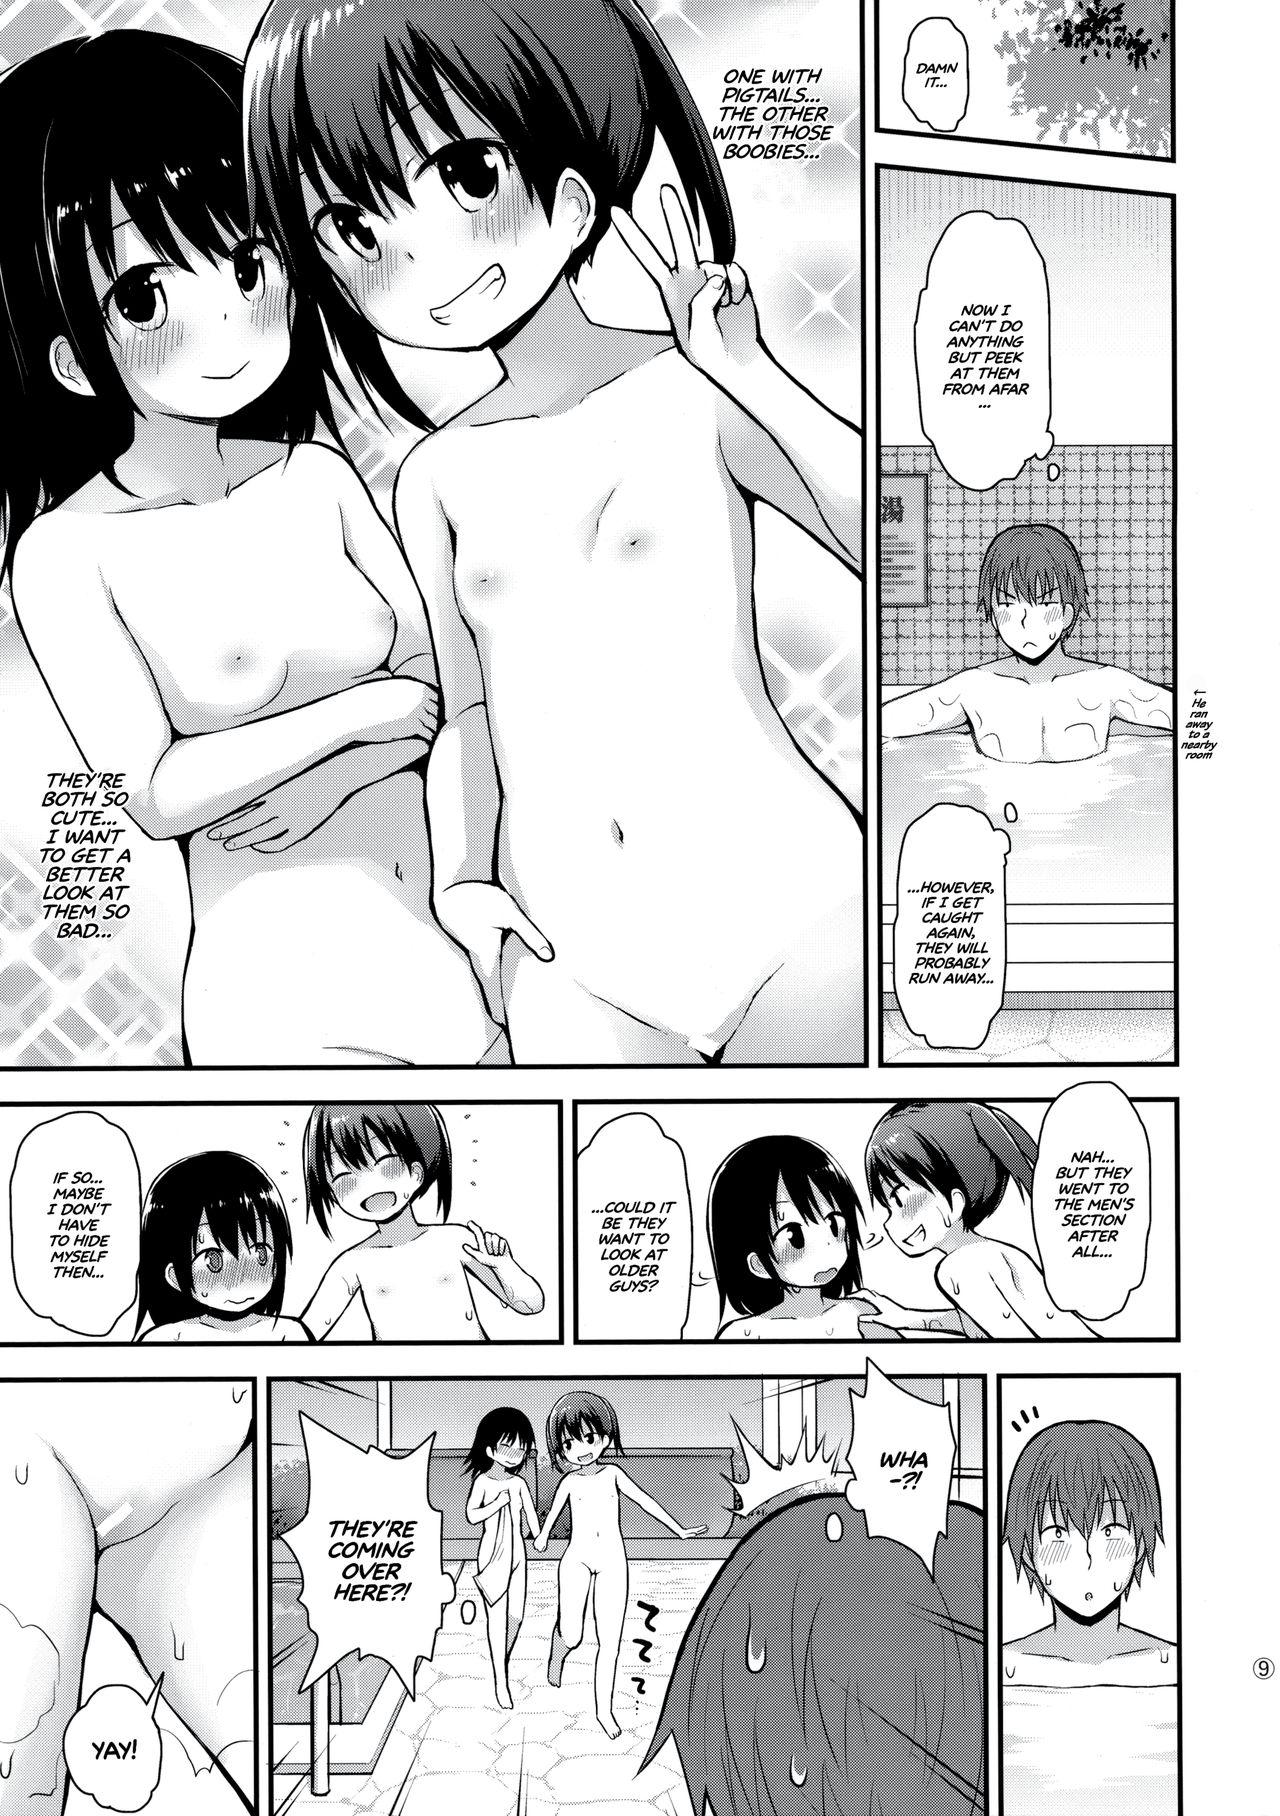 Bigbutt Onnanoko datte Otokoyu ni Hairitai | They may just be little girls, but they still want to enter the men's bath! - Original Amateur - Page 8